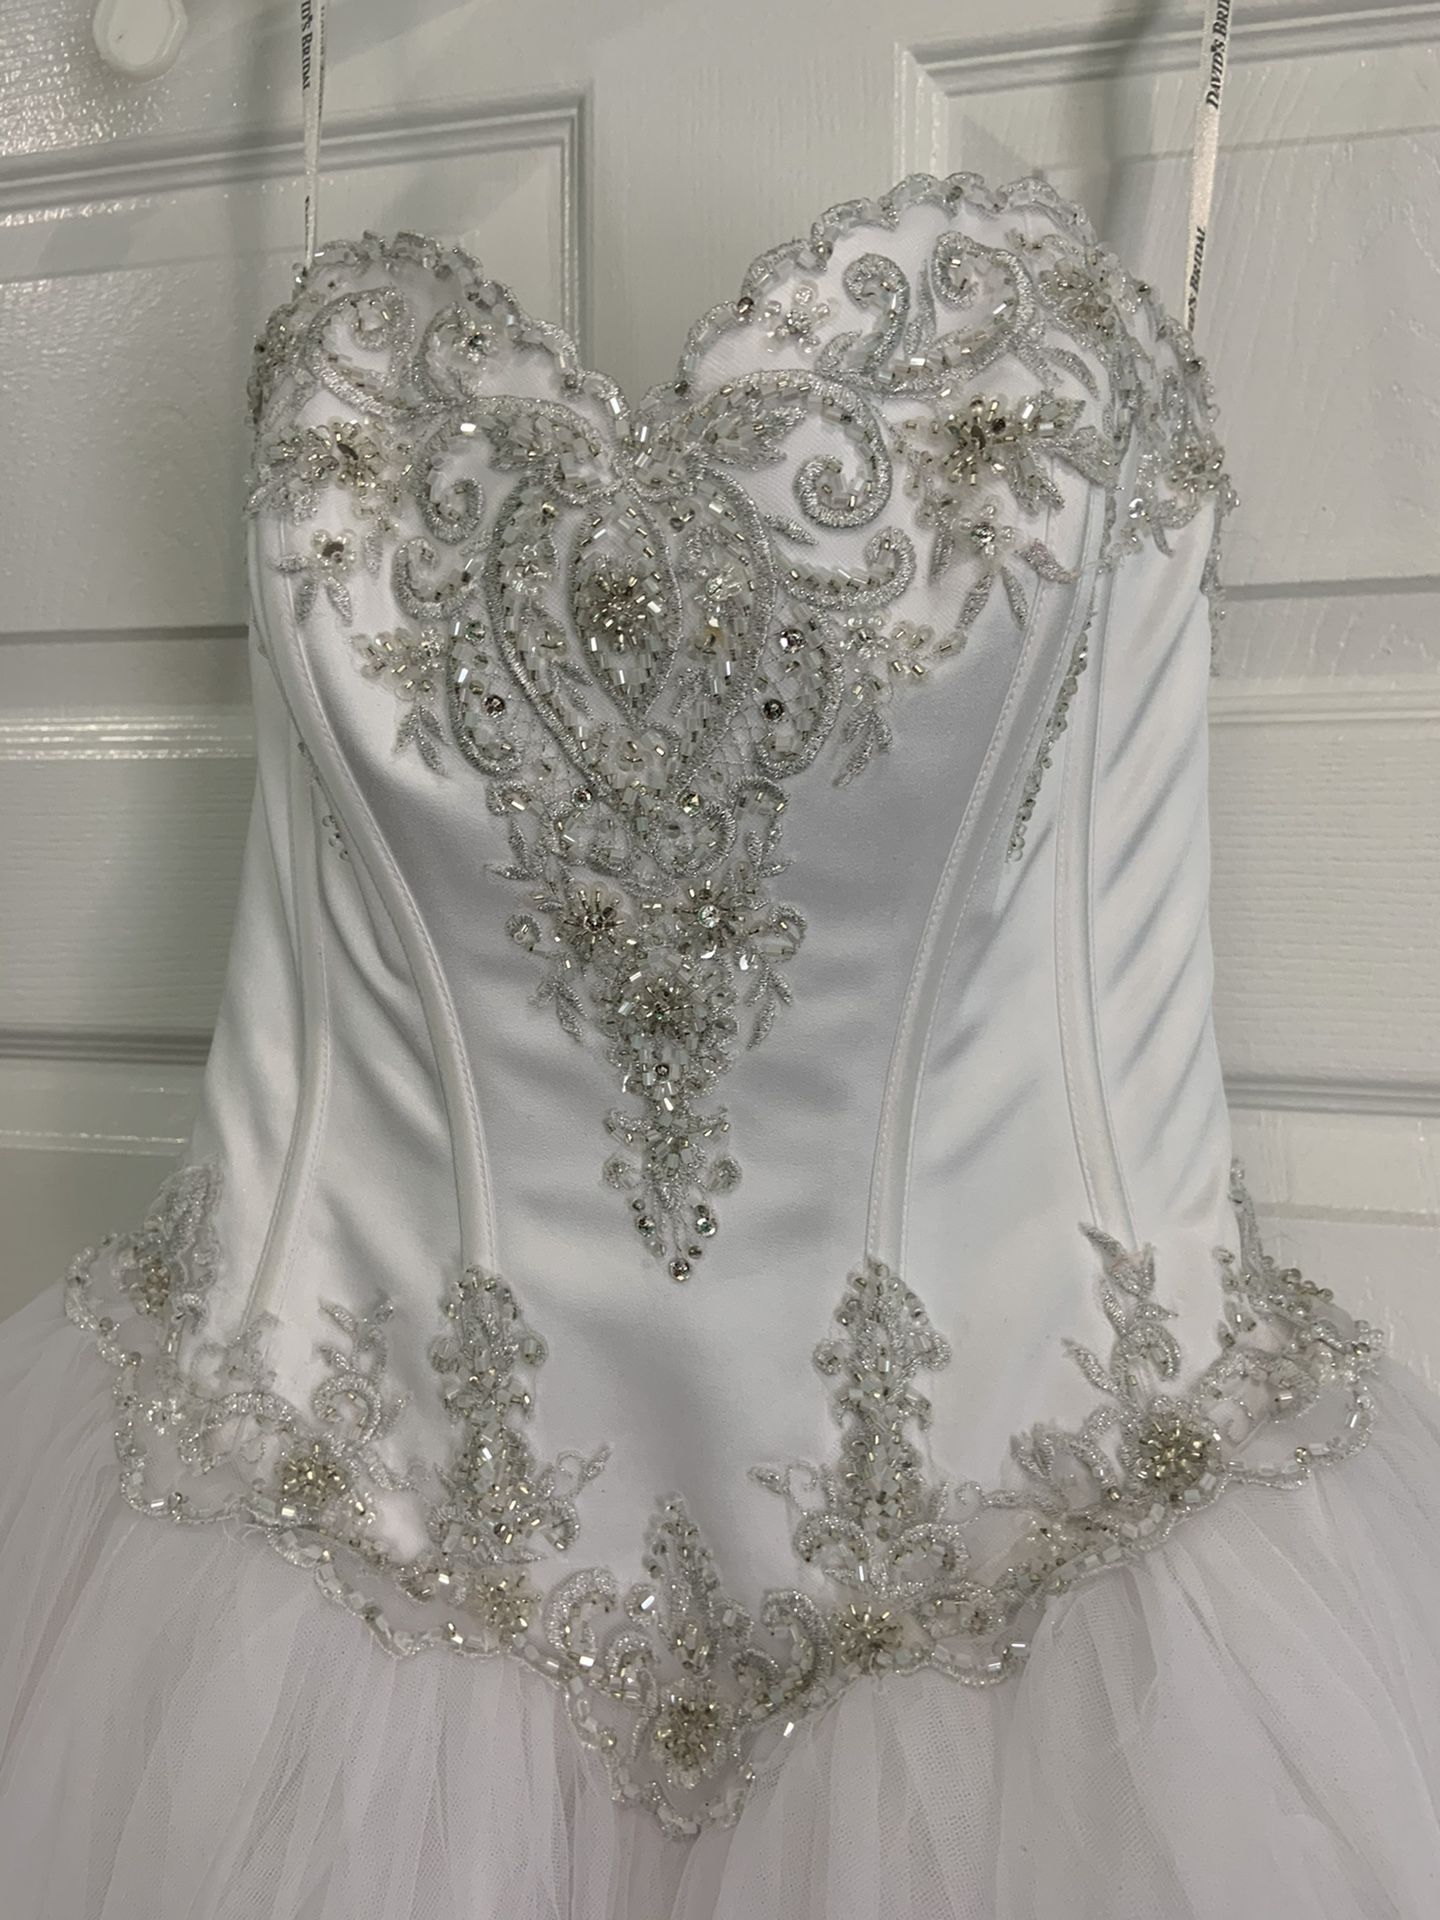 Wedding ball gown size 0-2. Perfect for sweet 16, Quinceanera or debutante ball.